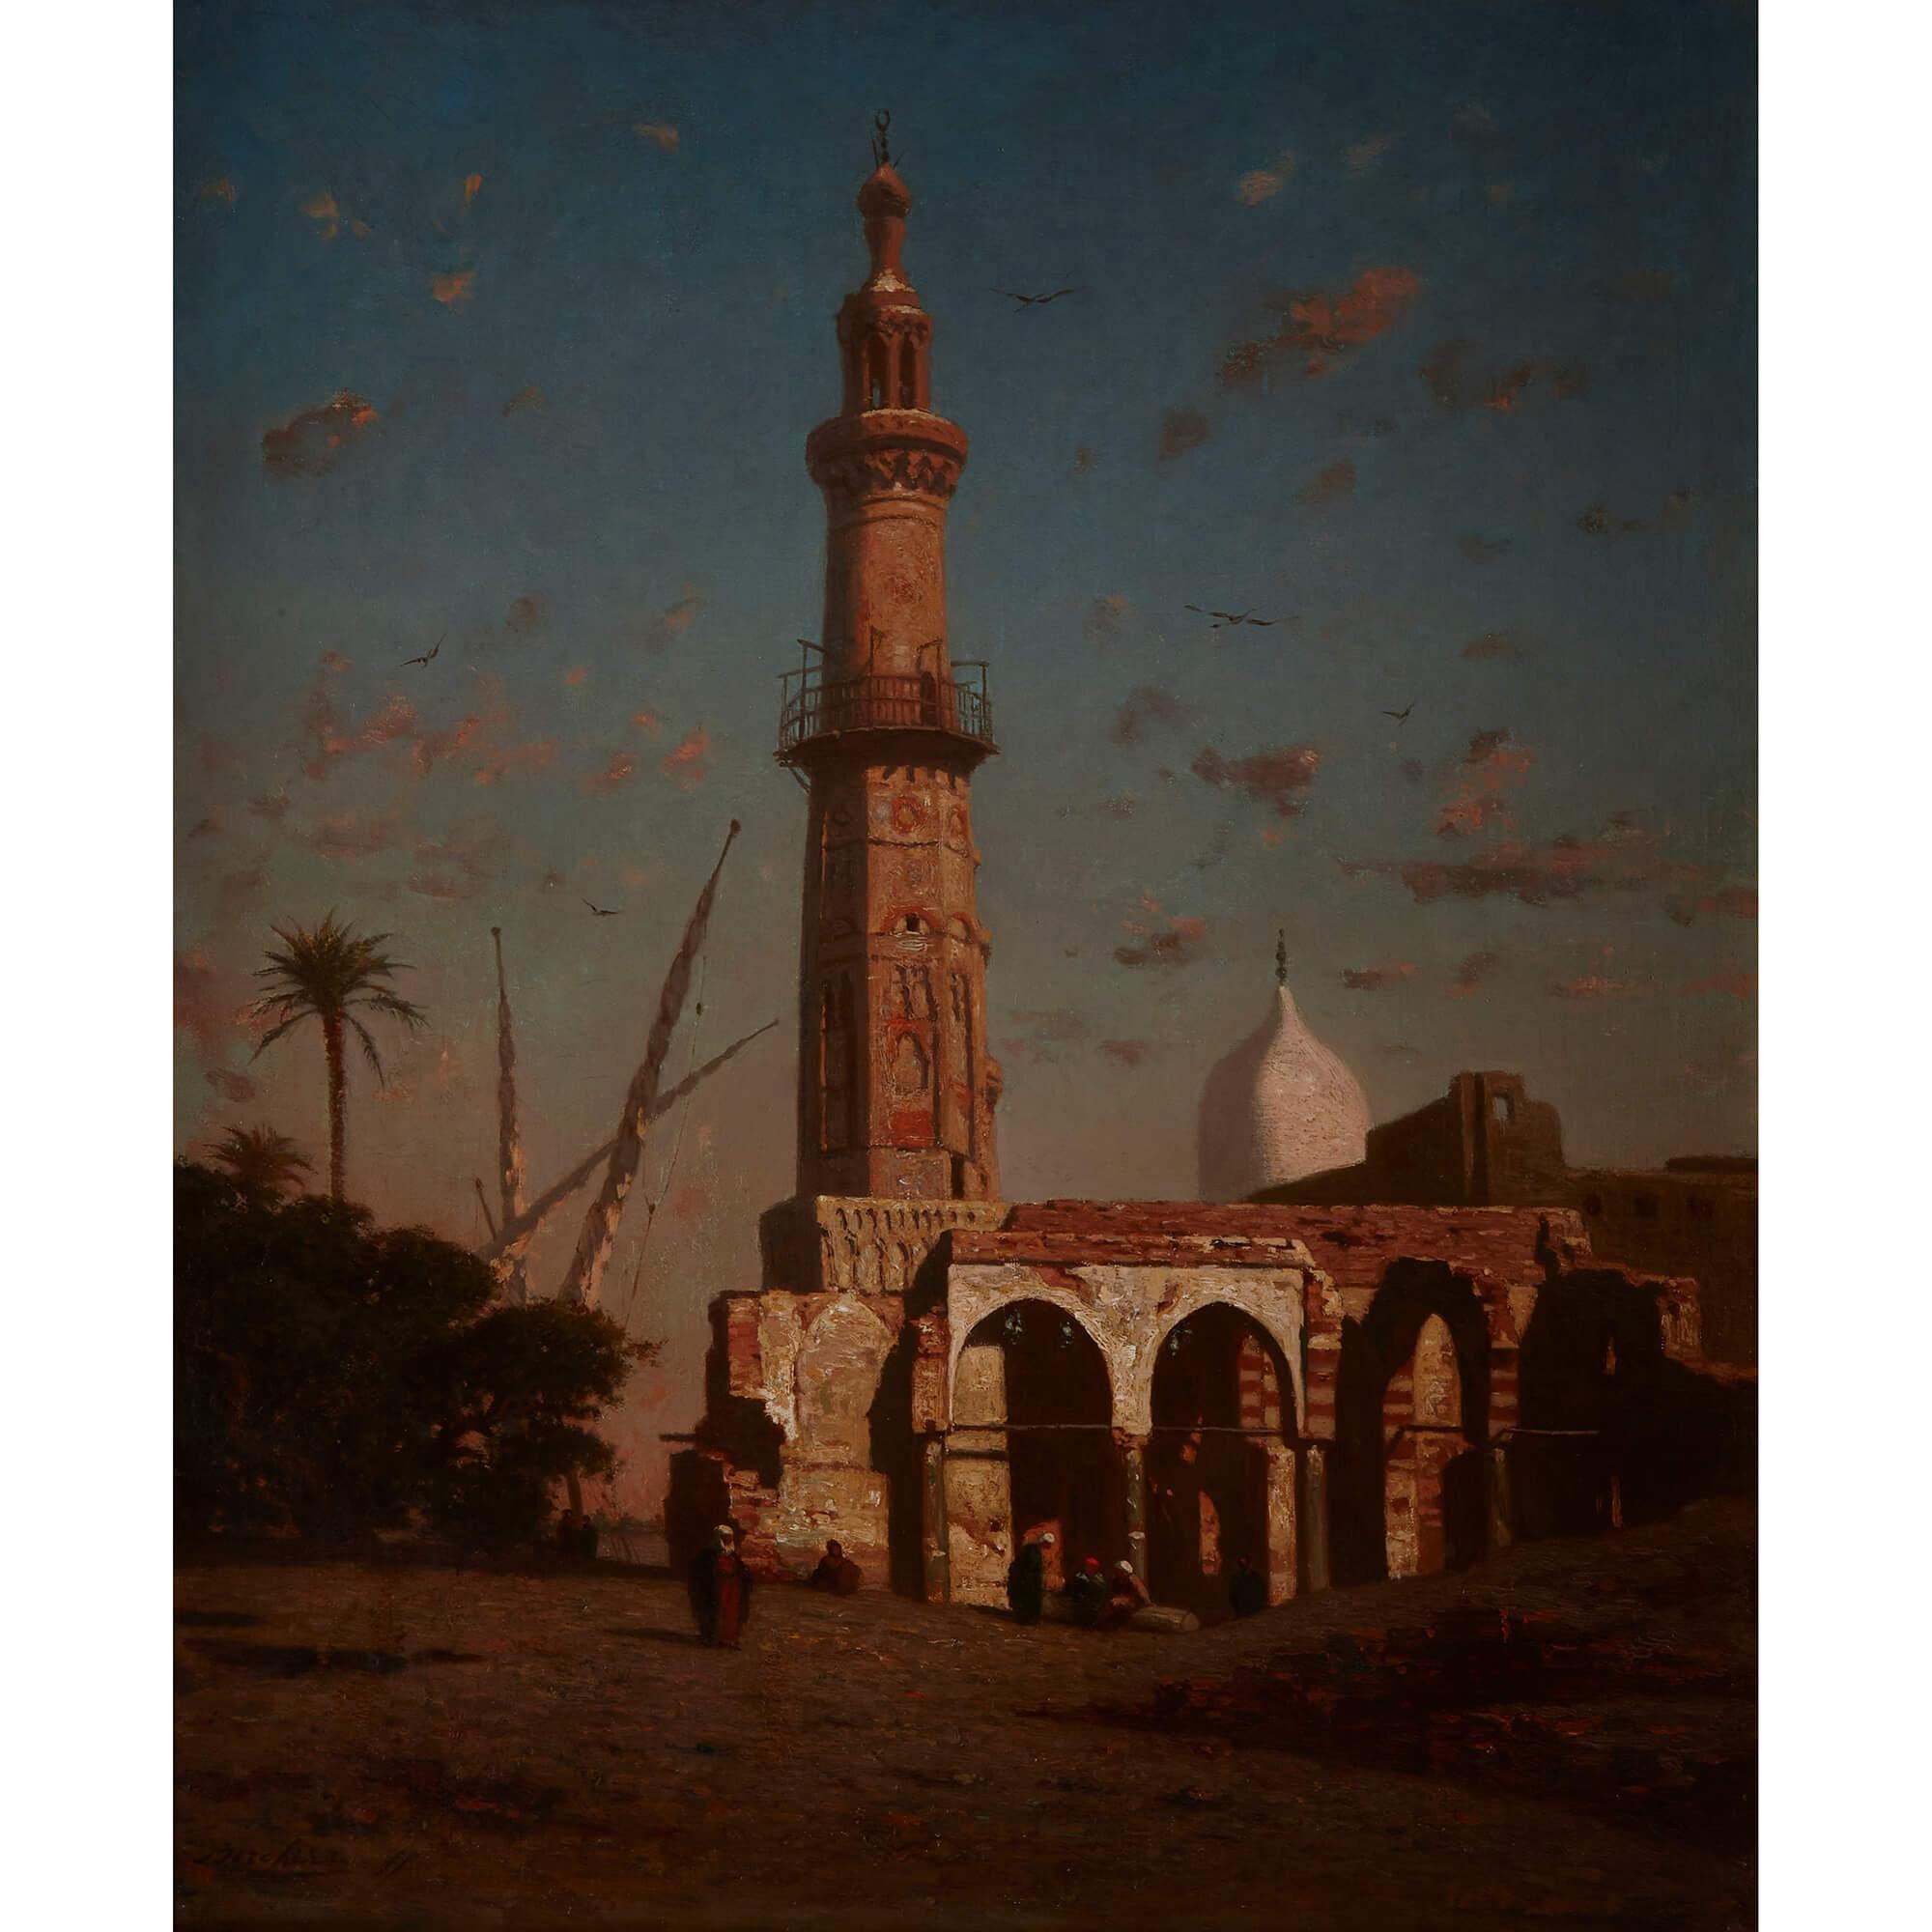 Oil painting of a Middle Eastern coastal town with a minaret by Berchère
French, 19th Century
Canvas: Height 46cm, width 38cm
Frame: Height 74cm, width 67cm, depth 10cm

This atmospheric scene is by Narcisse Berchère (1819-1891), a French painter